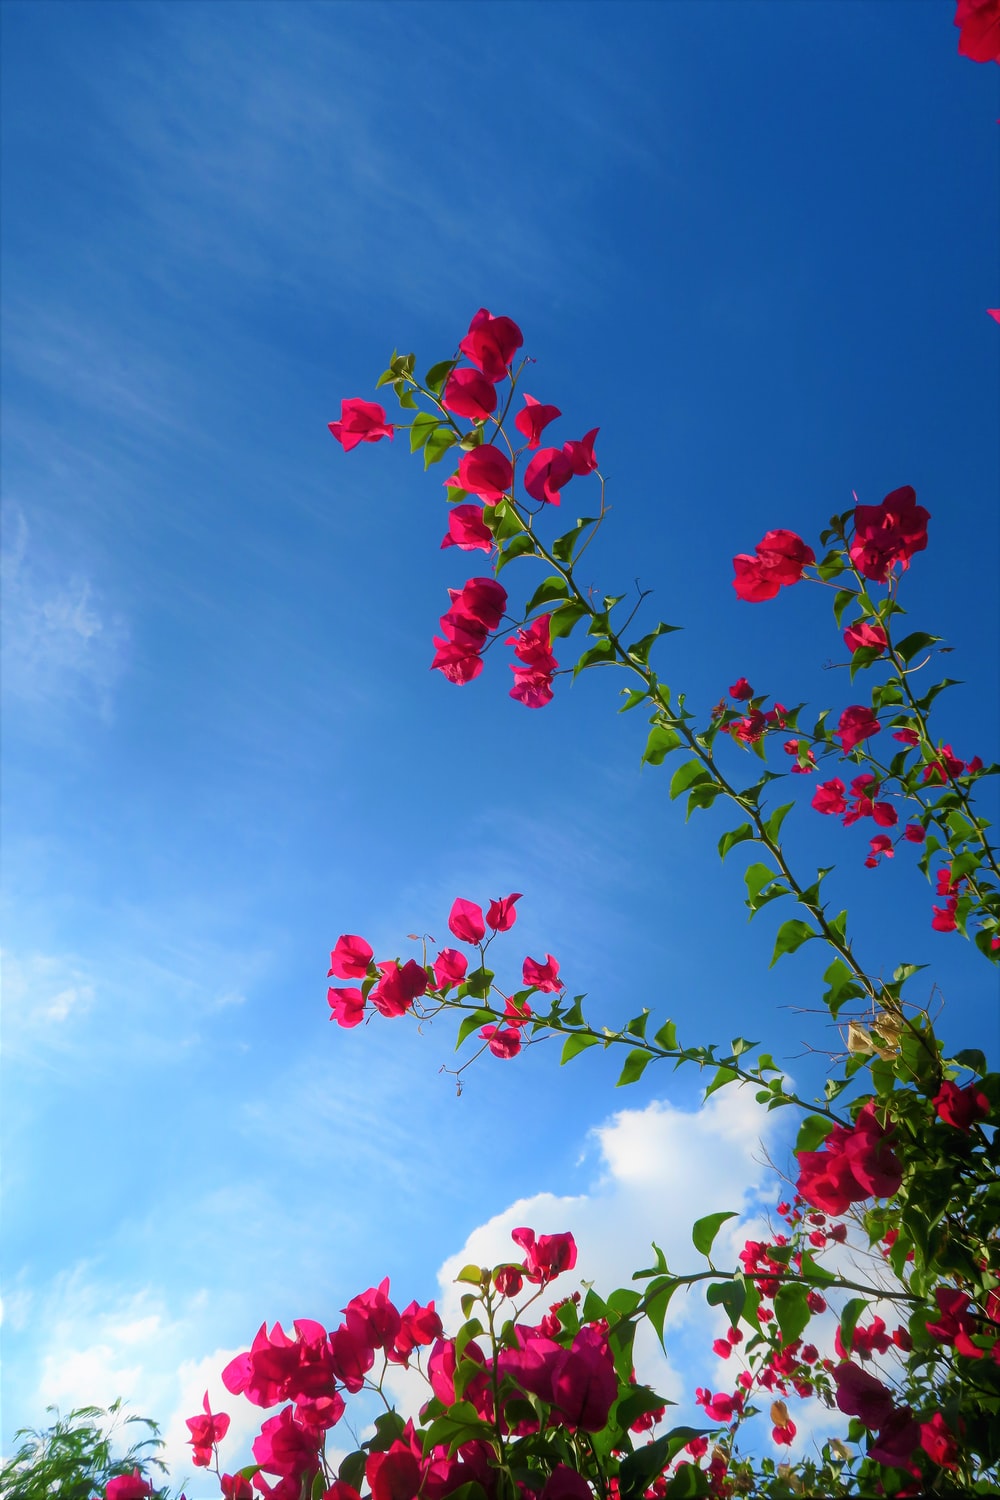 Spring Sky Picture. Download Free Image